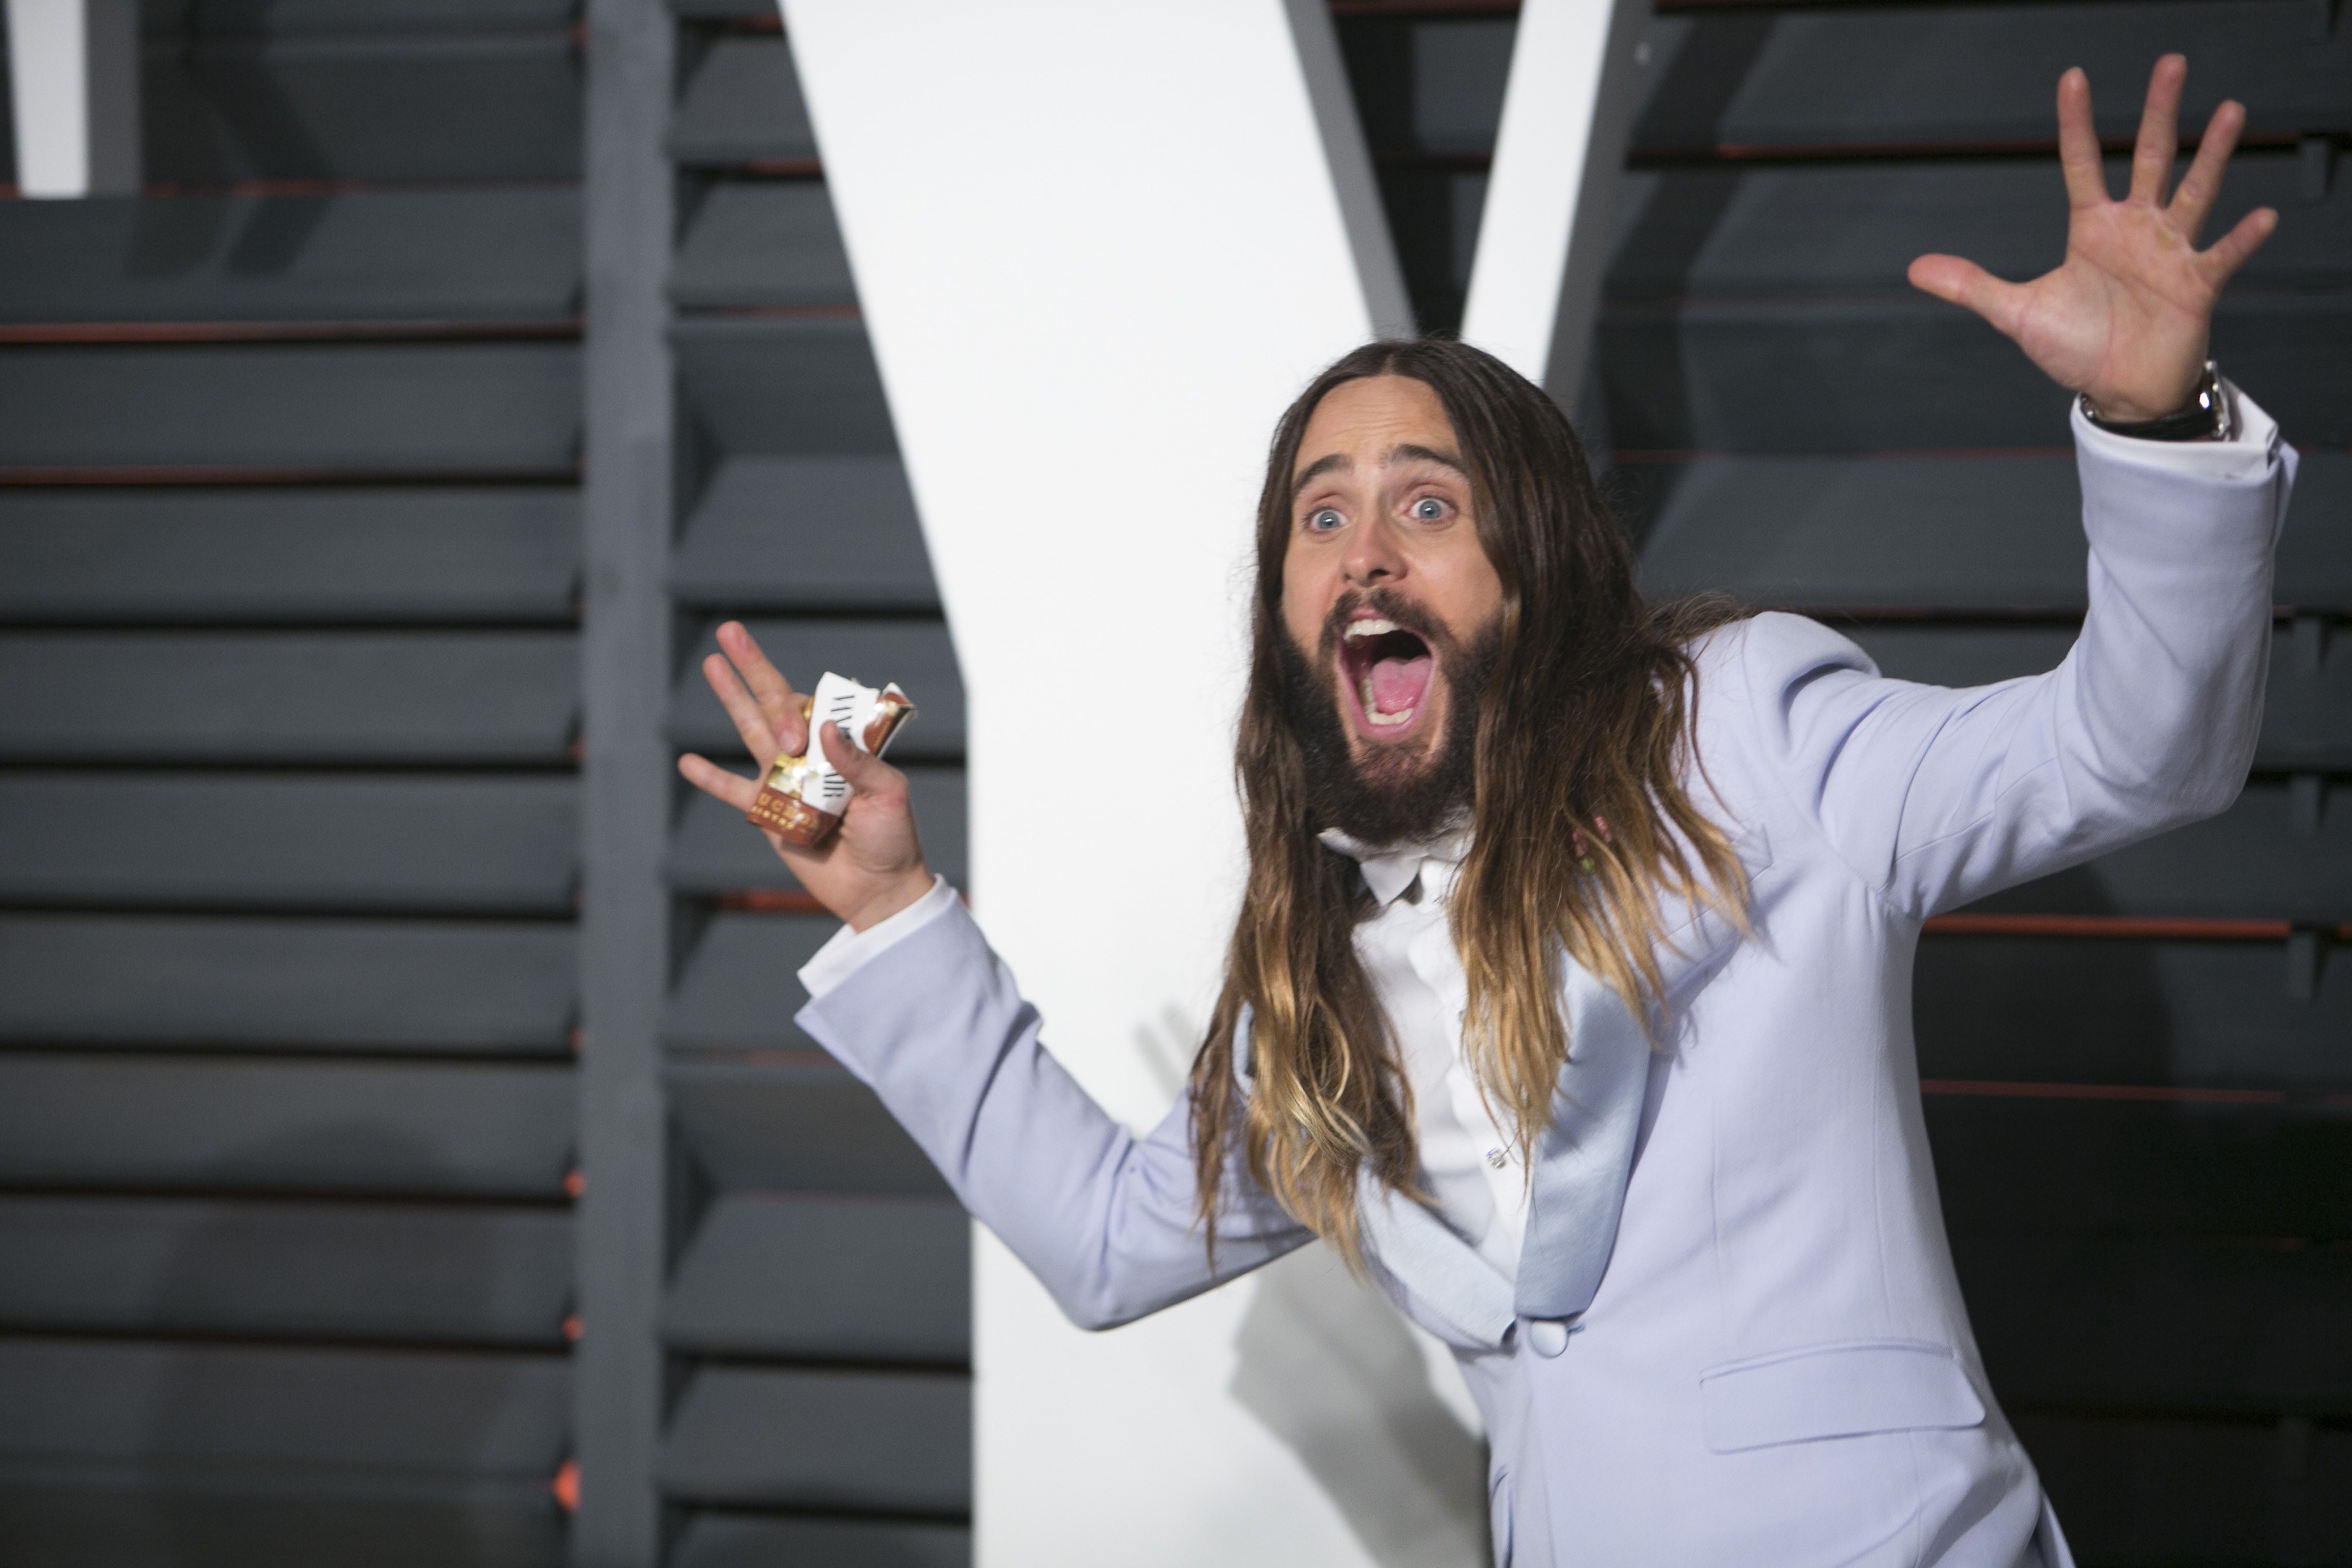 Jared Leto arrives to the 2015 Vanity Fair Oscar Party February 22, 2015 in Beverly Hills, California.